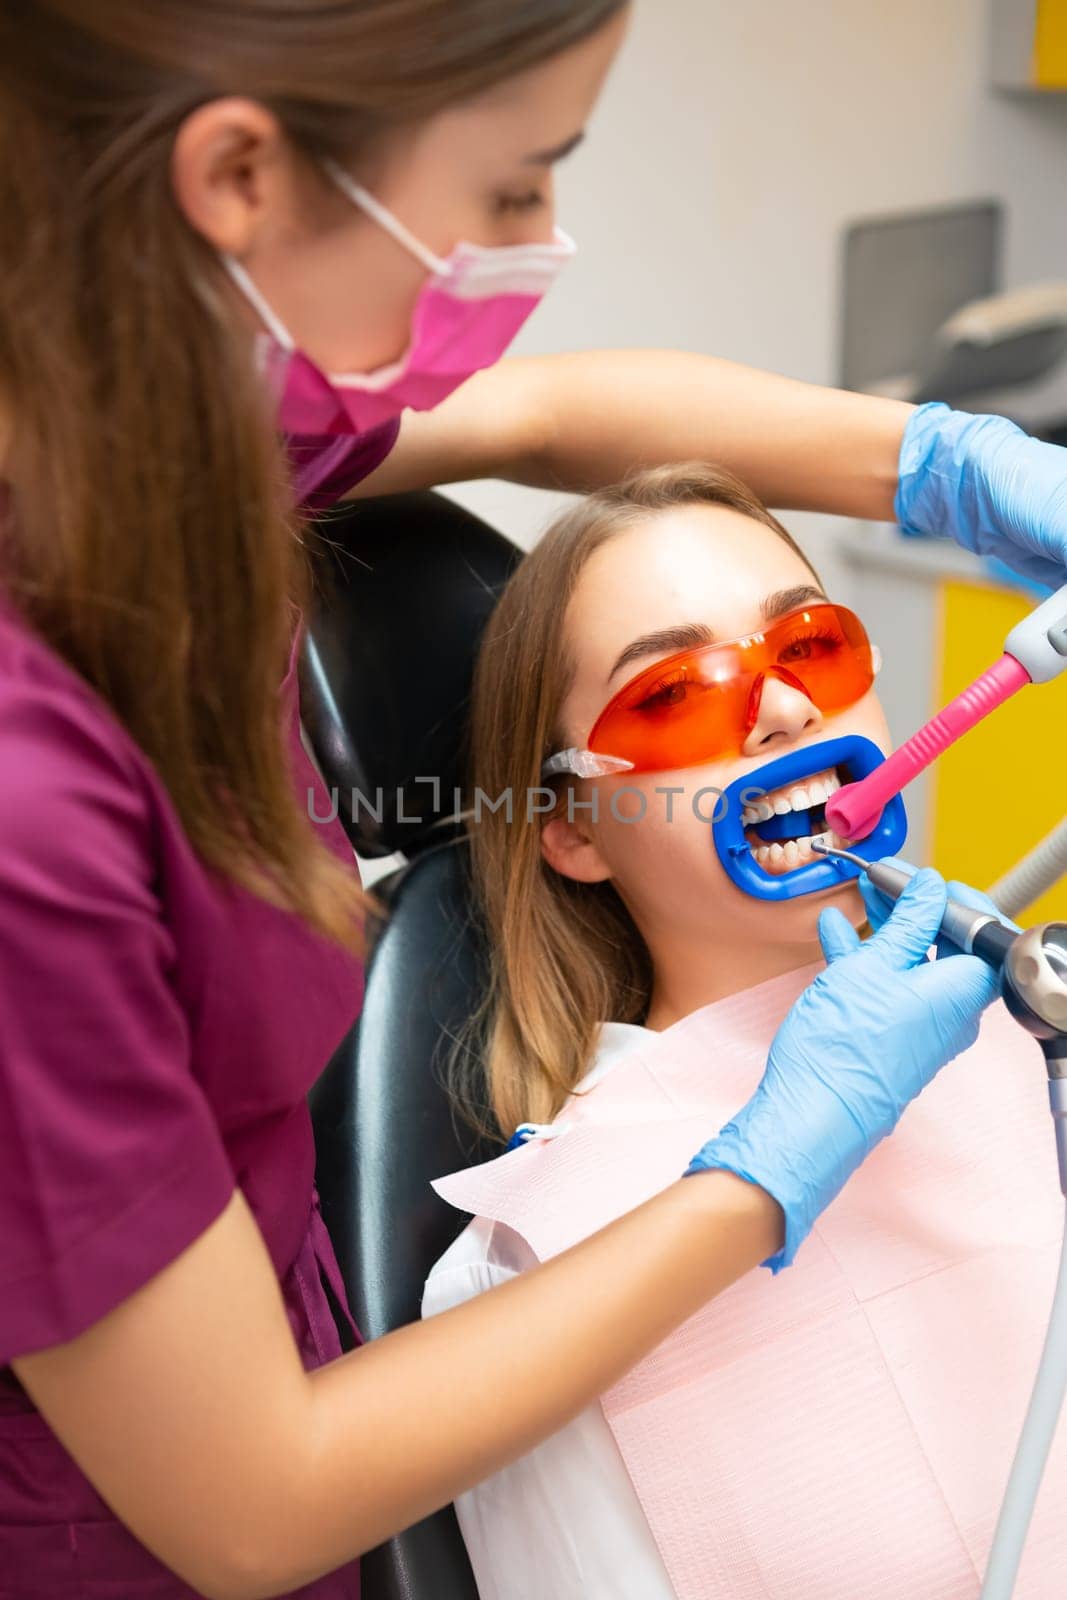 Dentist in gloves performing teeth cleaning from plaque detector on teeth. Doctor uses small tool with water supply in dental office